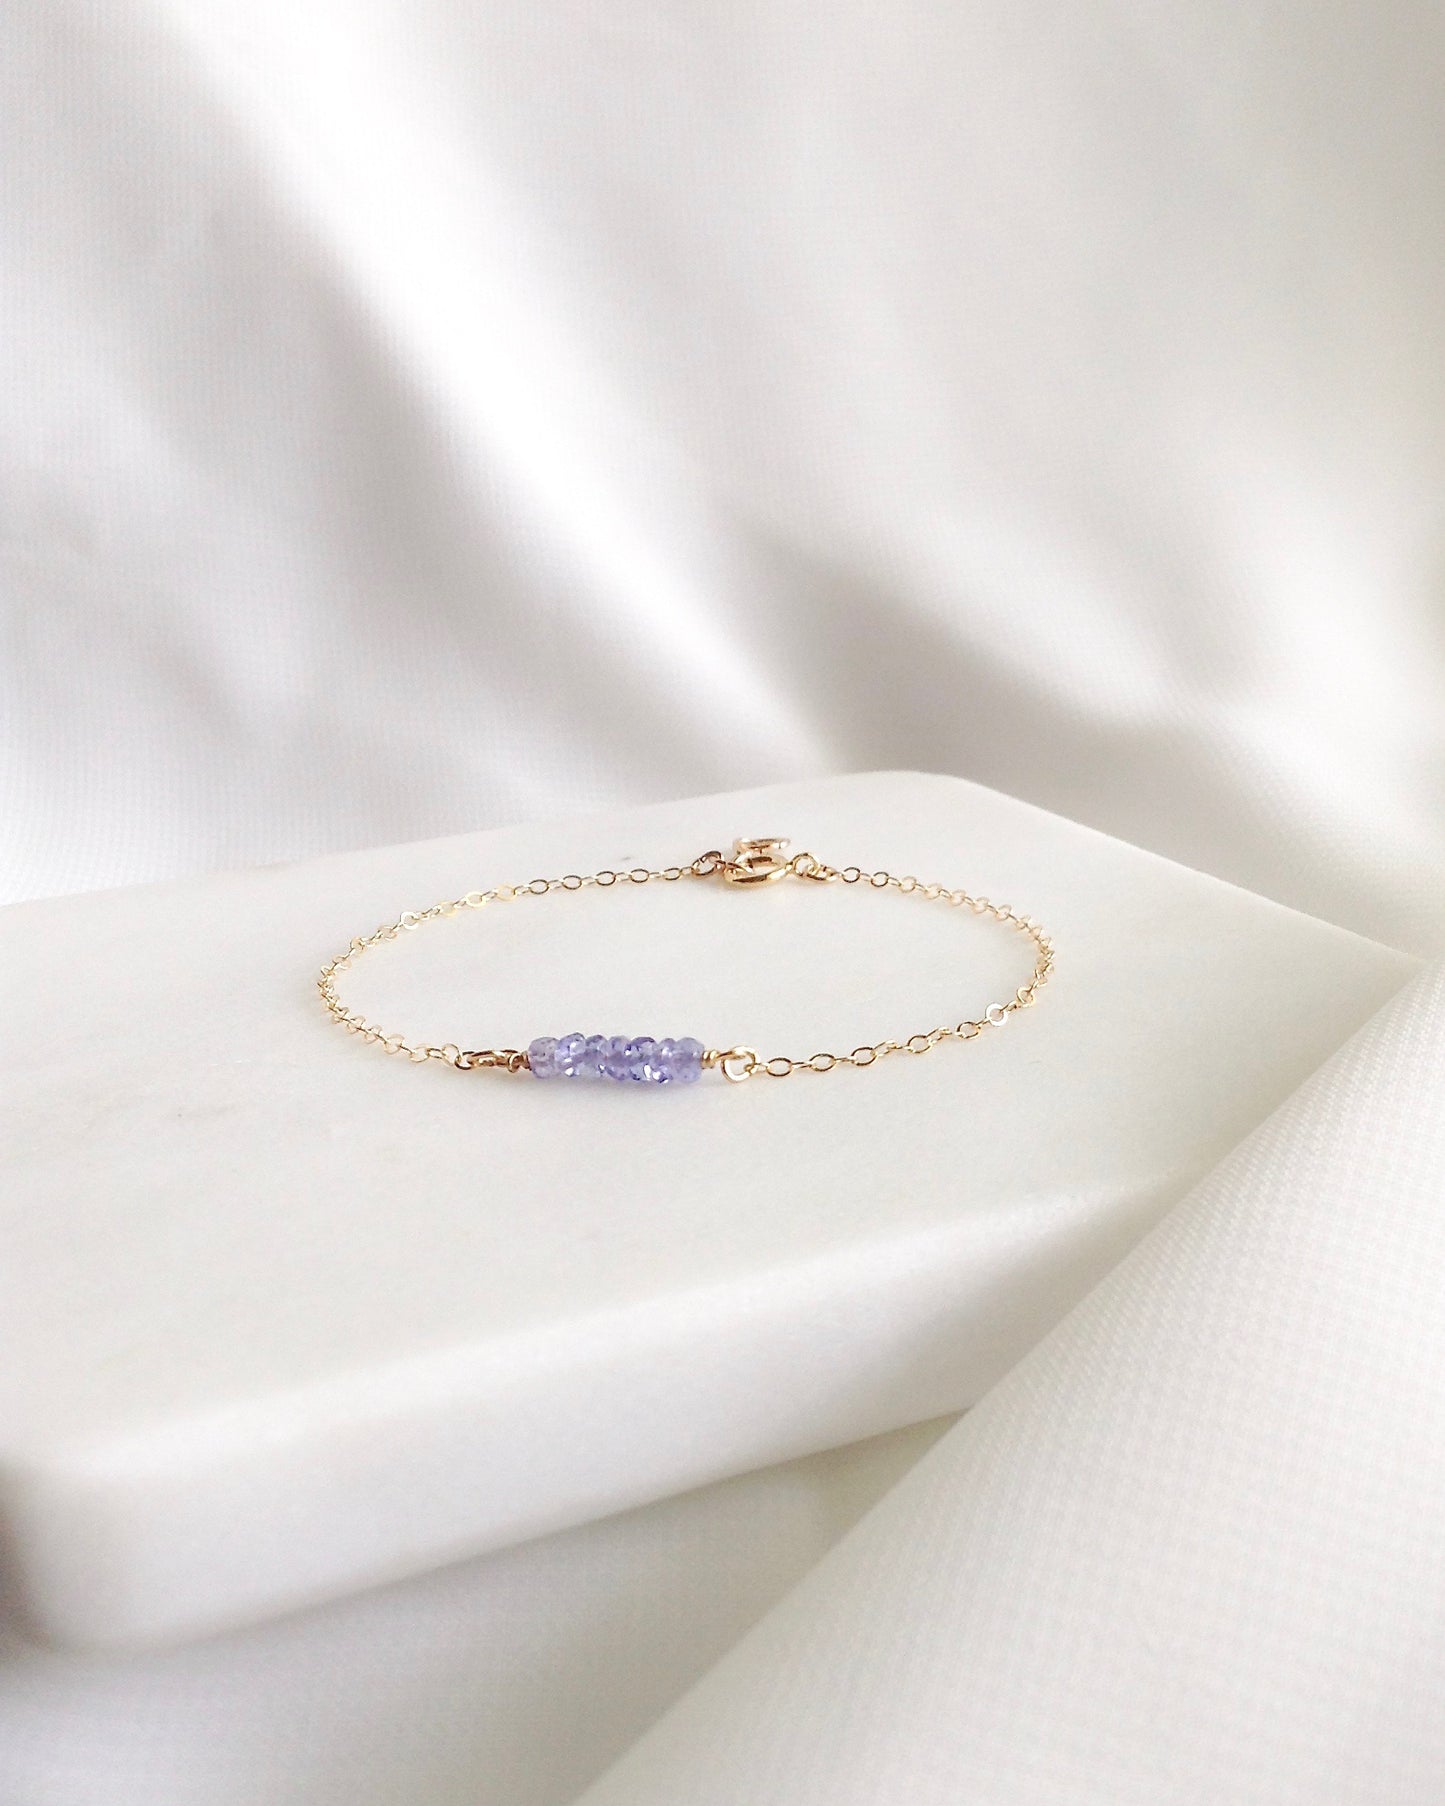 Tiny Tanzanite Bracelet In Gold Filled or Sterling Silver | IB Jewelry